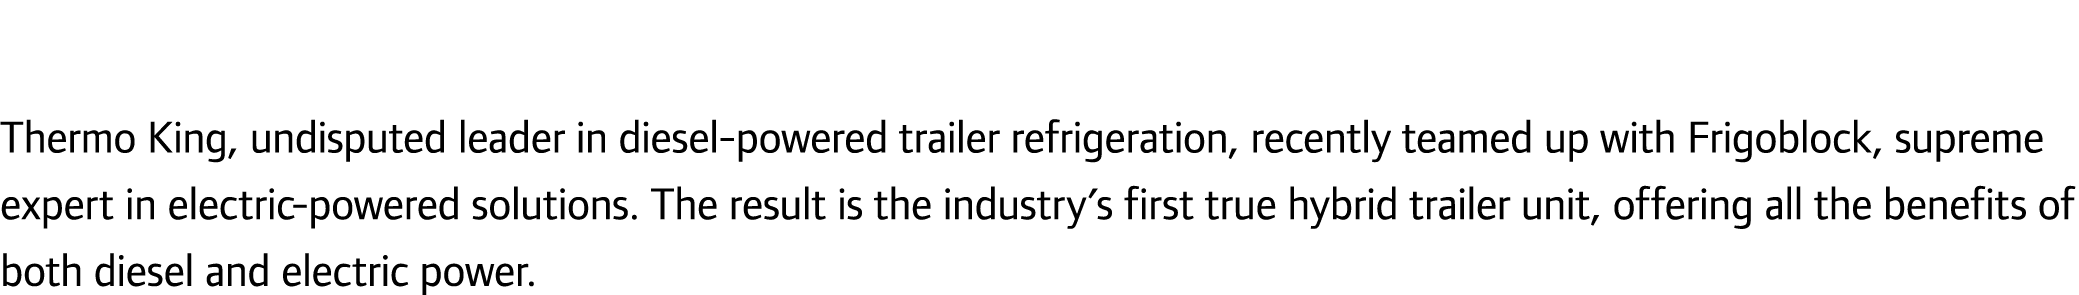 Thermo King, undisputed leader in diesel-powered trailer refrigeration, recently teamed up with Frigoblock, supreme e...